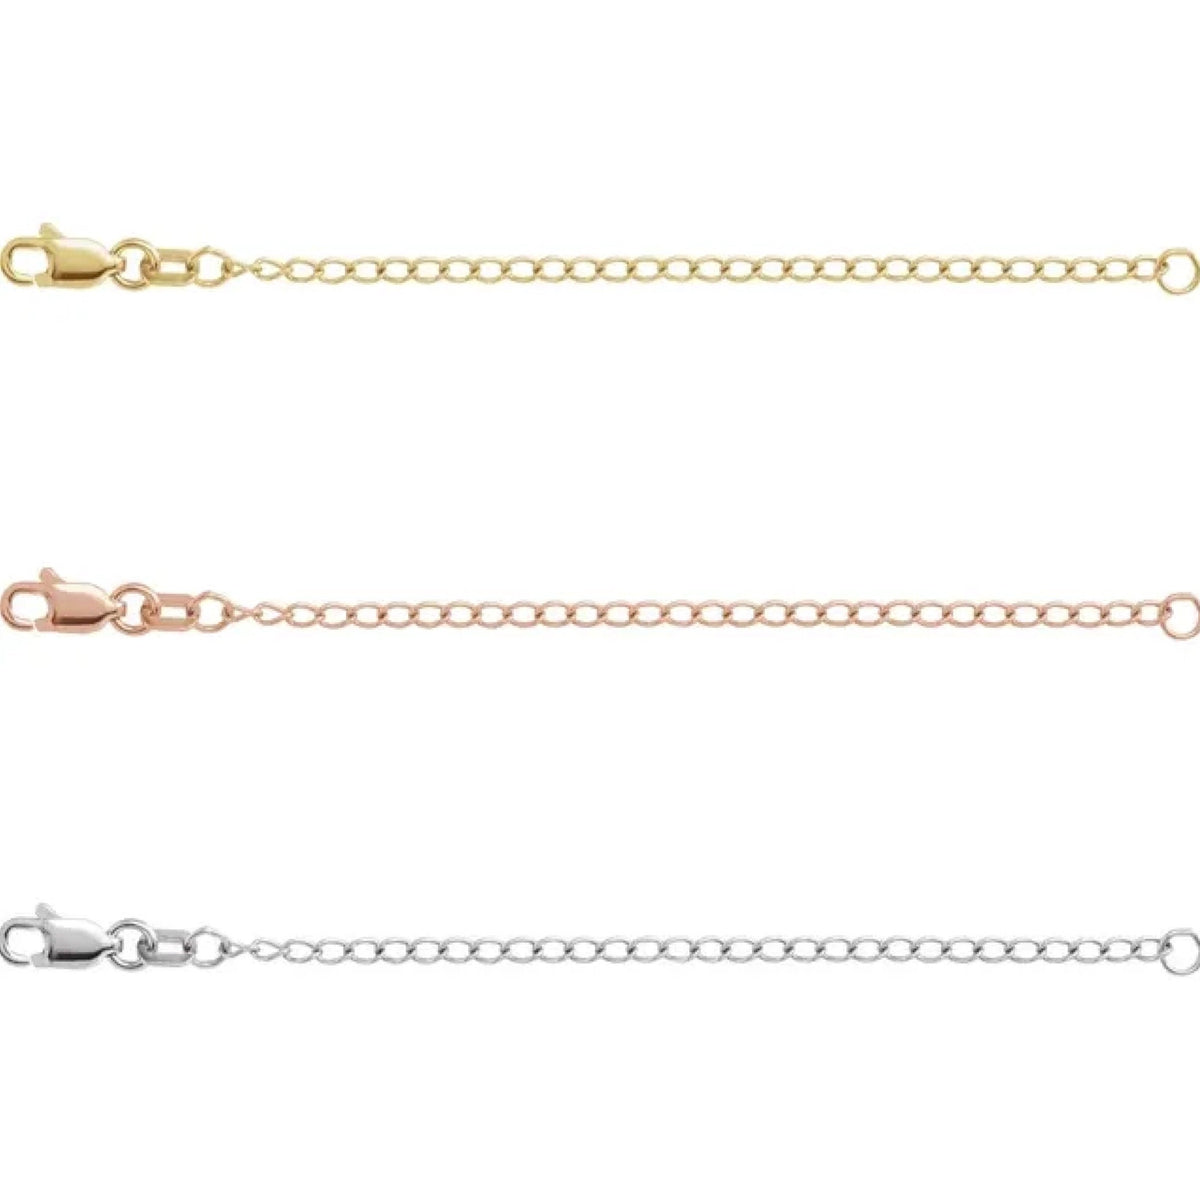 3 inch Chain Extender in 14k &10k Yellow Gold White Gold Rose / Gold Box Chain Extender / Cable Chain Extender / Rope Chain Extender /